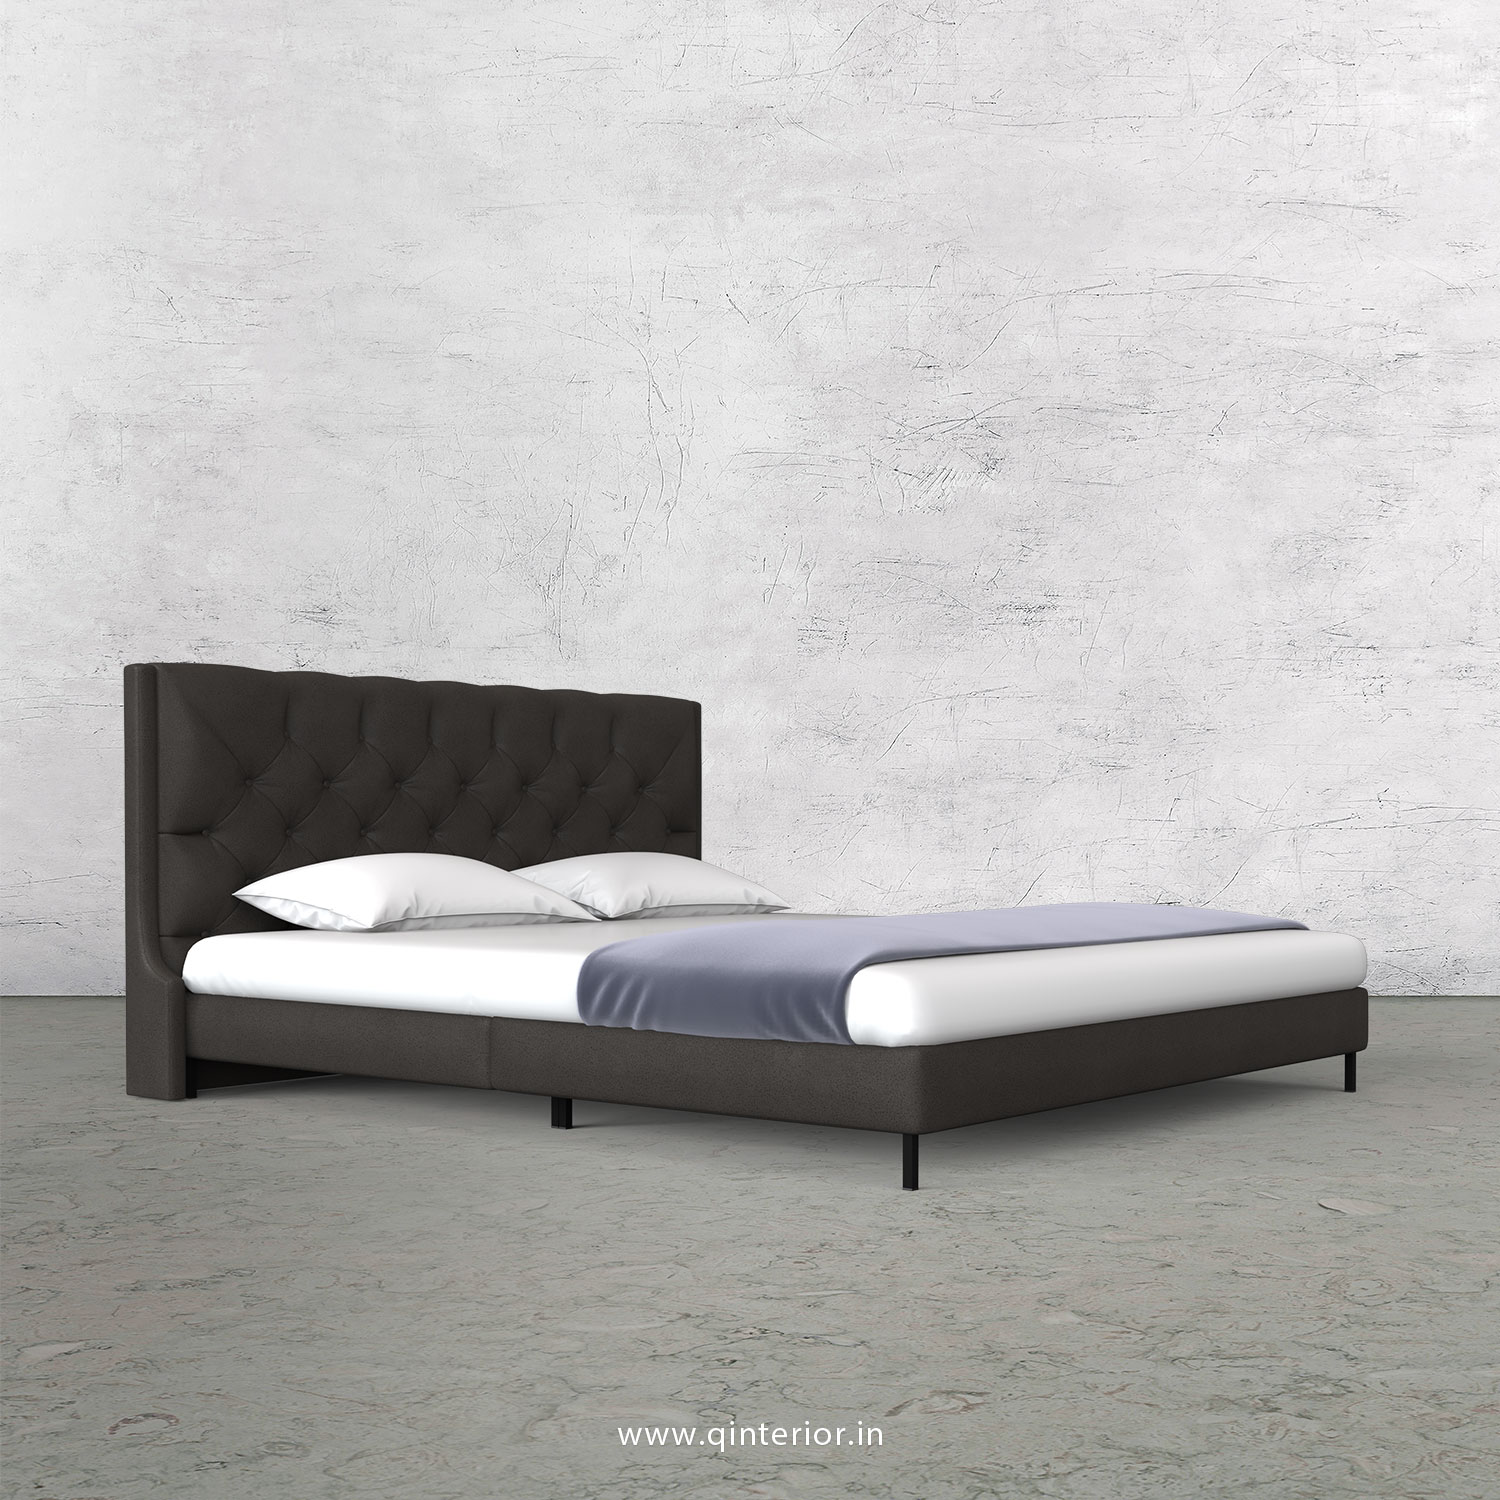 Scorpius Queen Size Bed with Fab Leather Fabric - QBD003 FL15